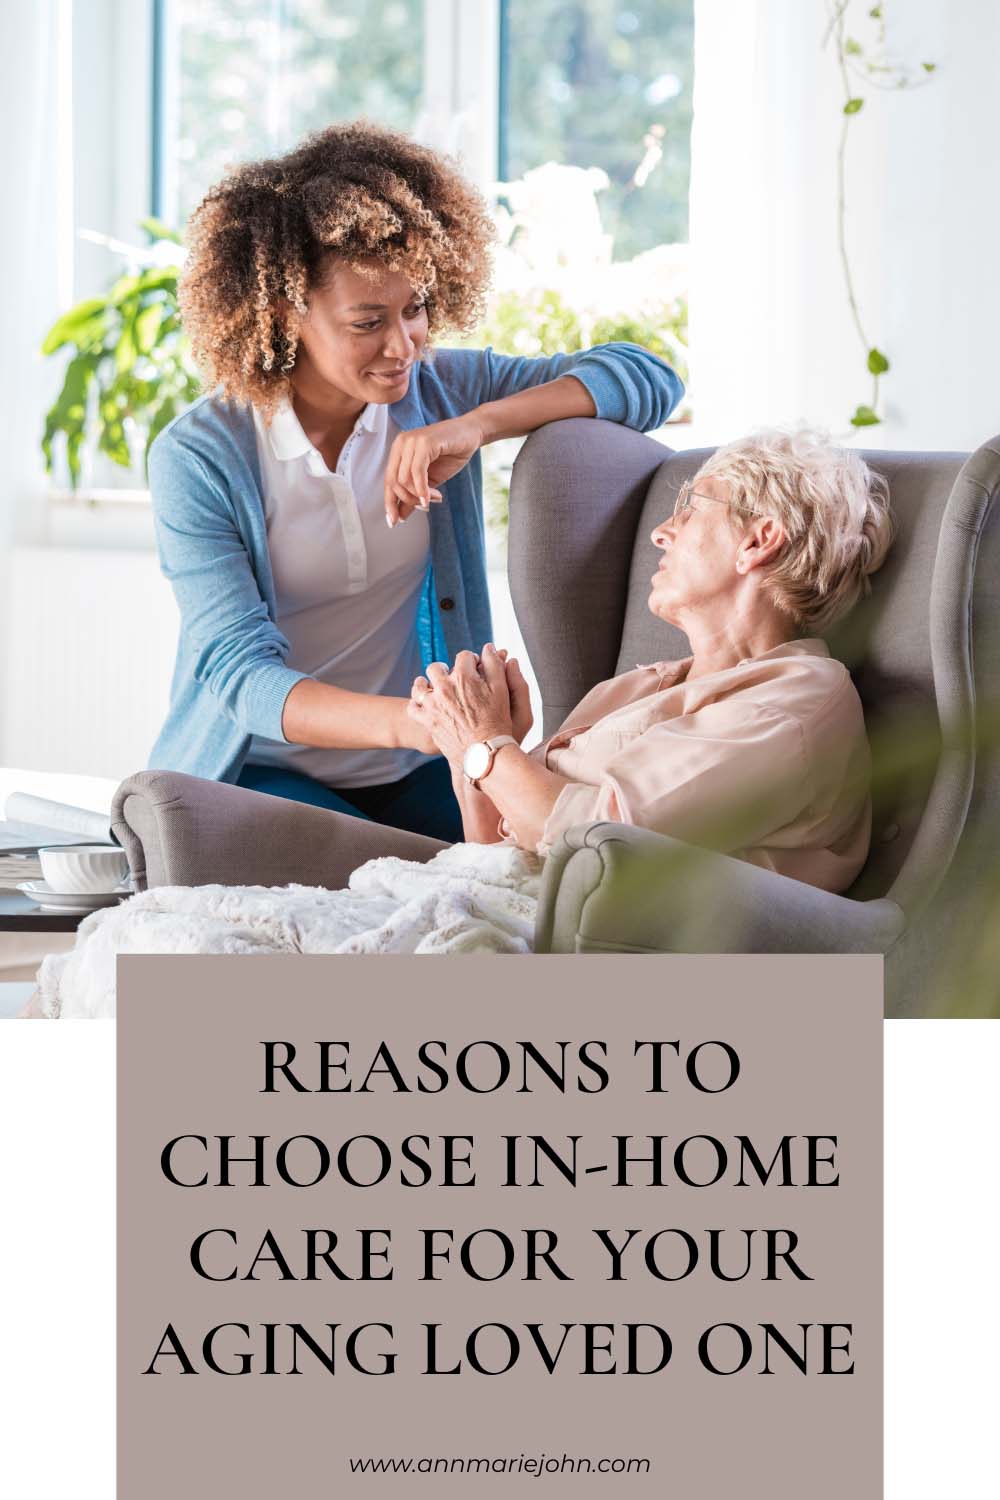 Reasons to Choose In-Home Care for Your Aging Loved One